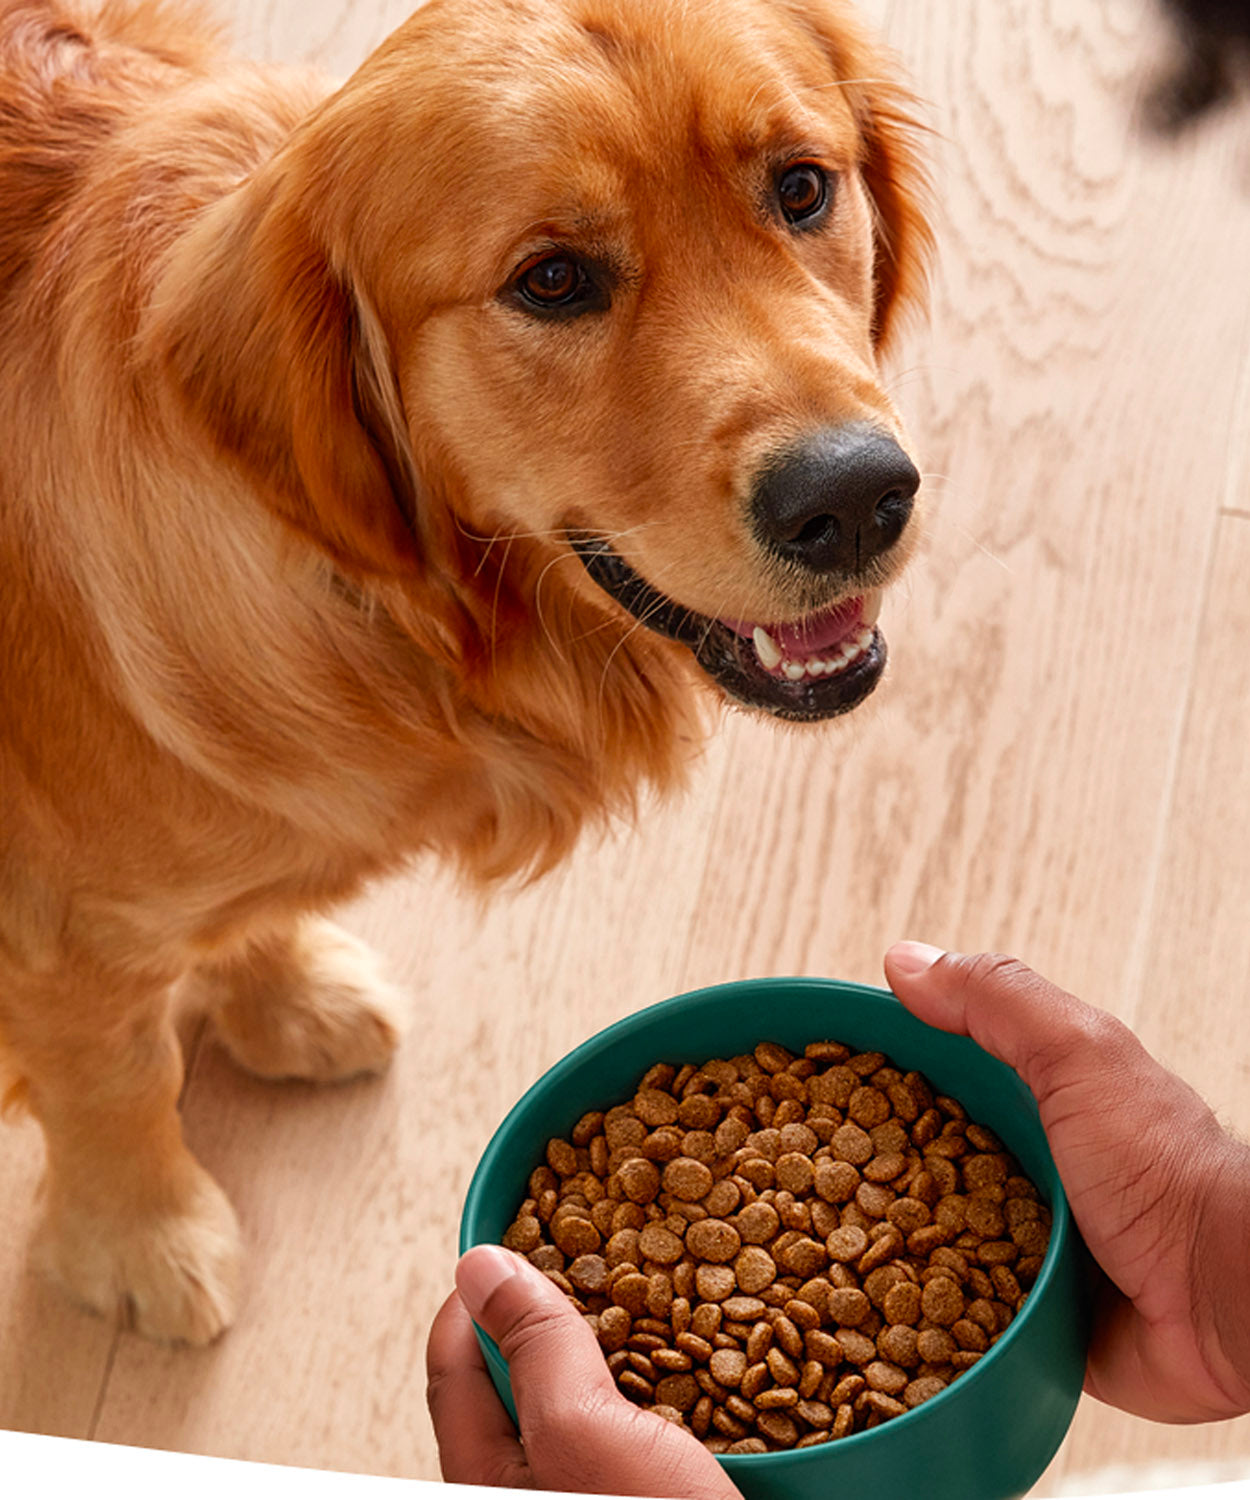 Point of view image of someone about to place a bowl of Jinx dry food in front of a golden retriever